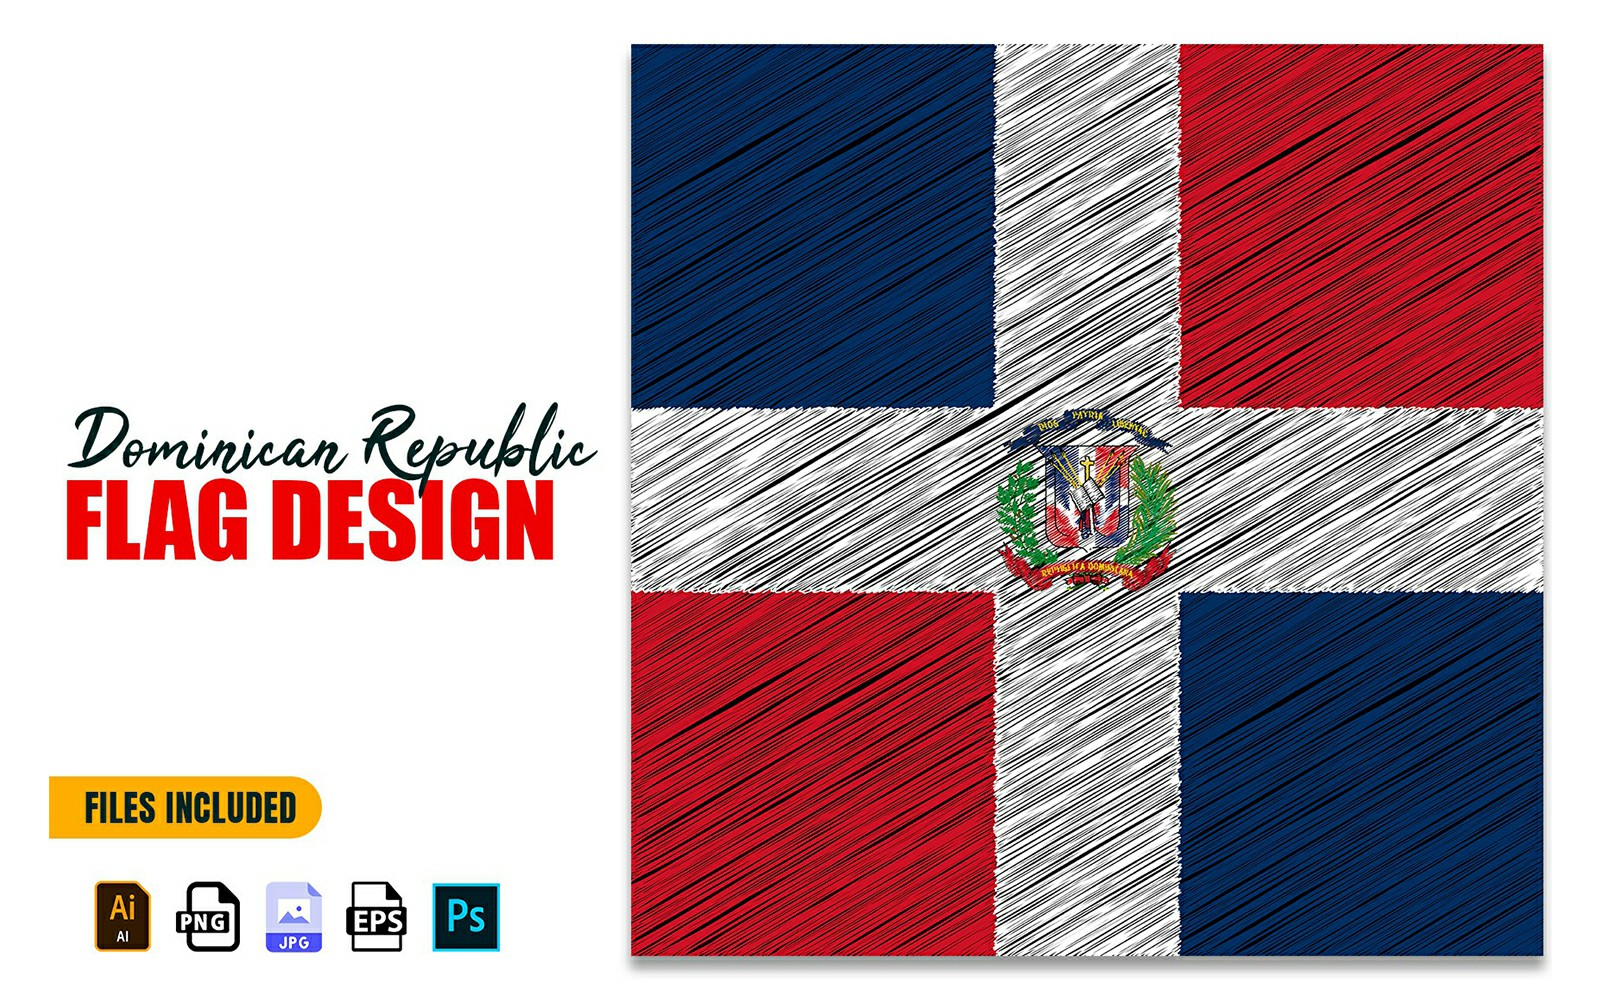 27 February Dominican Republic National Day Flag Design Illustration